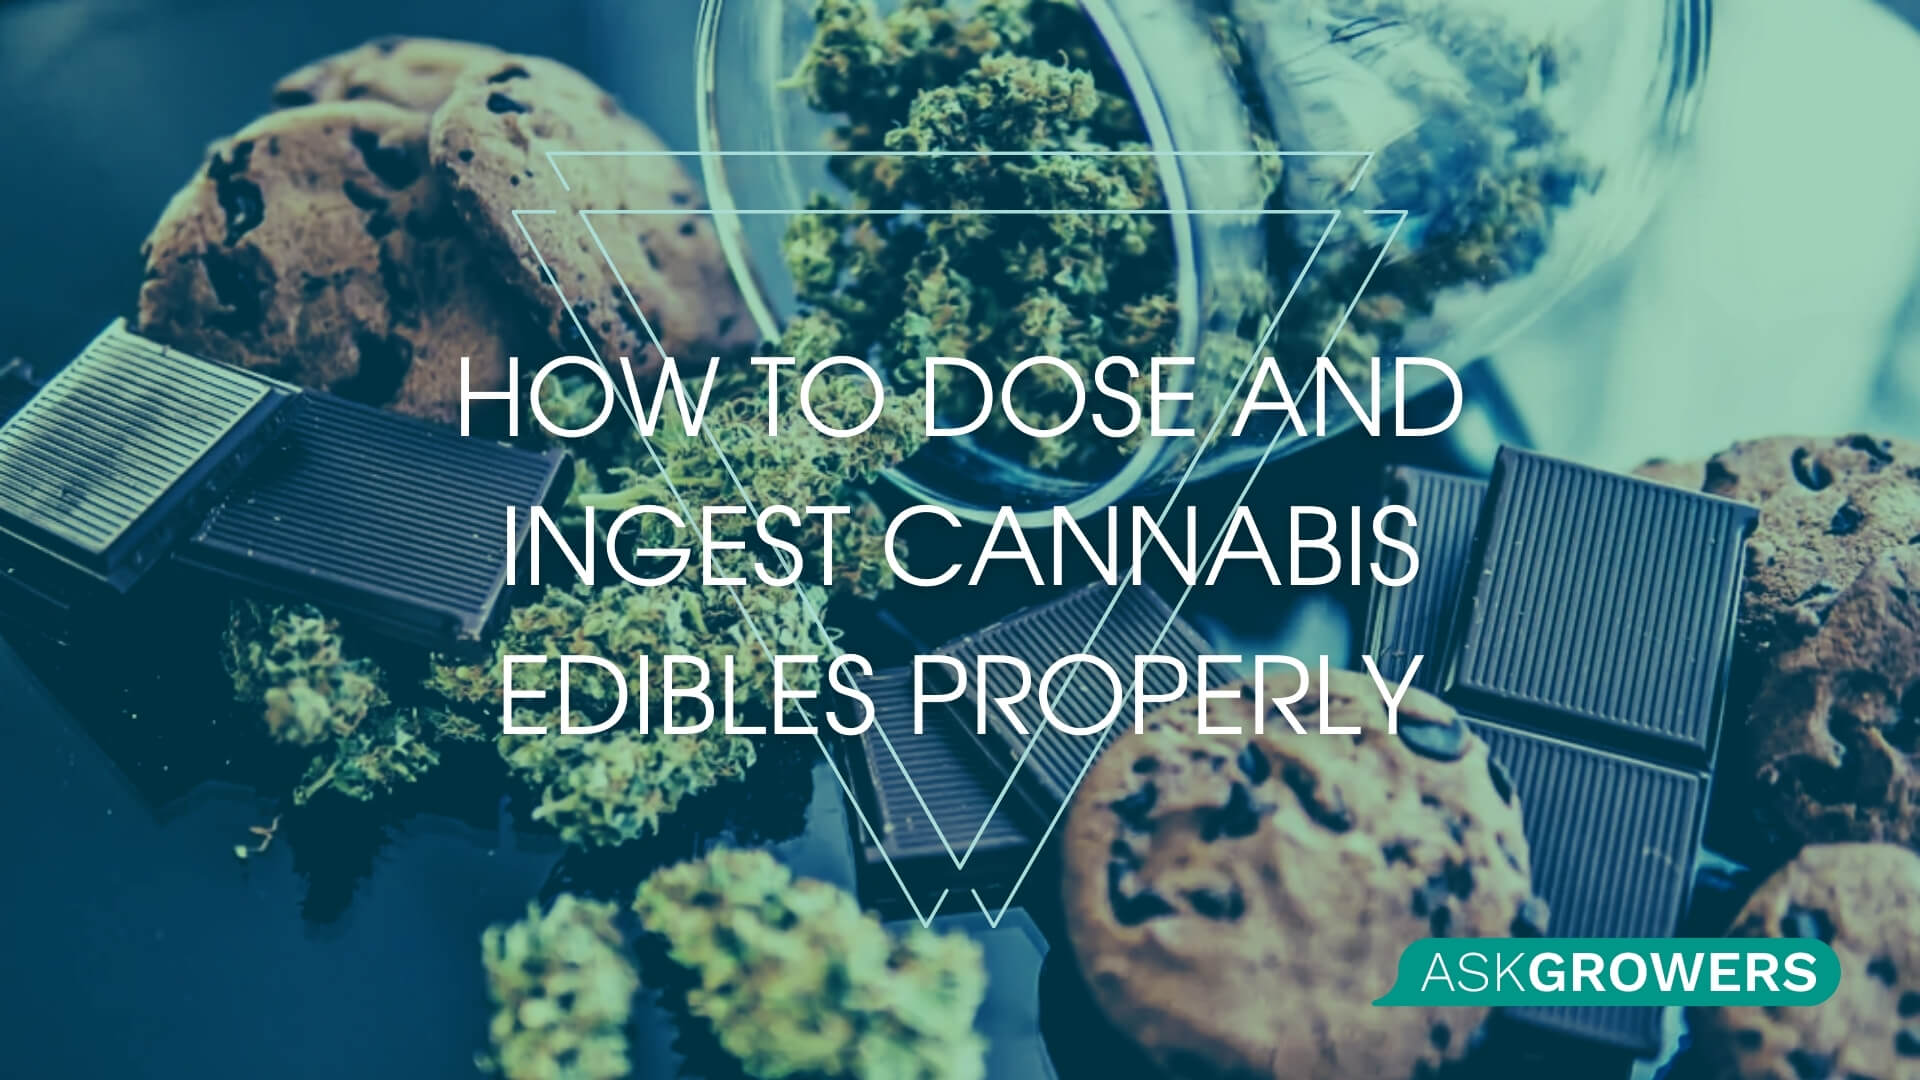 How to Dose and Ingest Cannabis Edibles Properly?